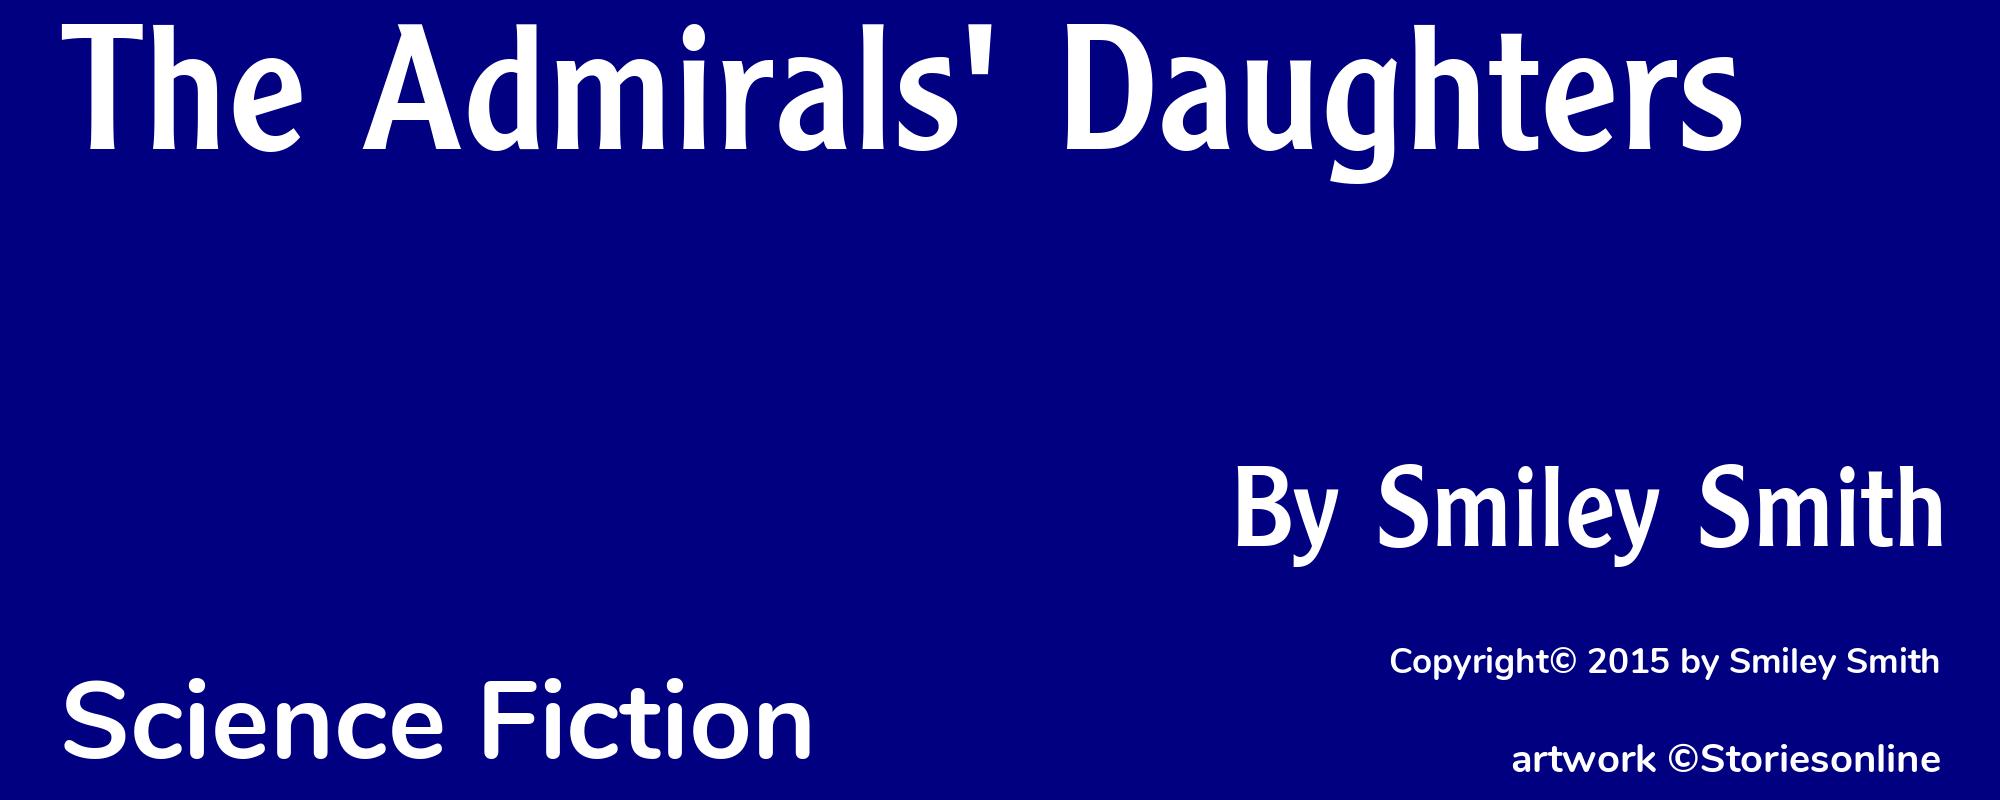 The Admirals' Daughters - Cover